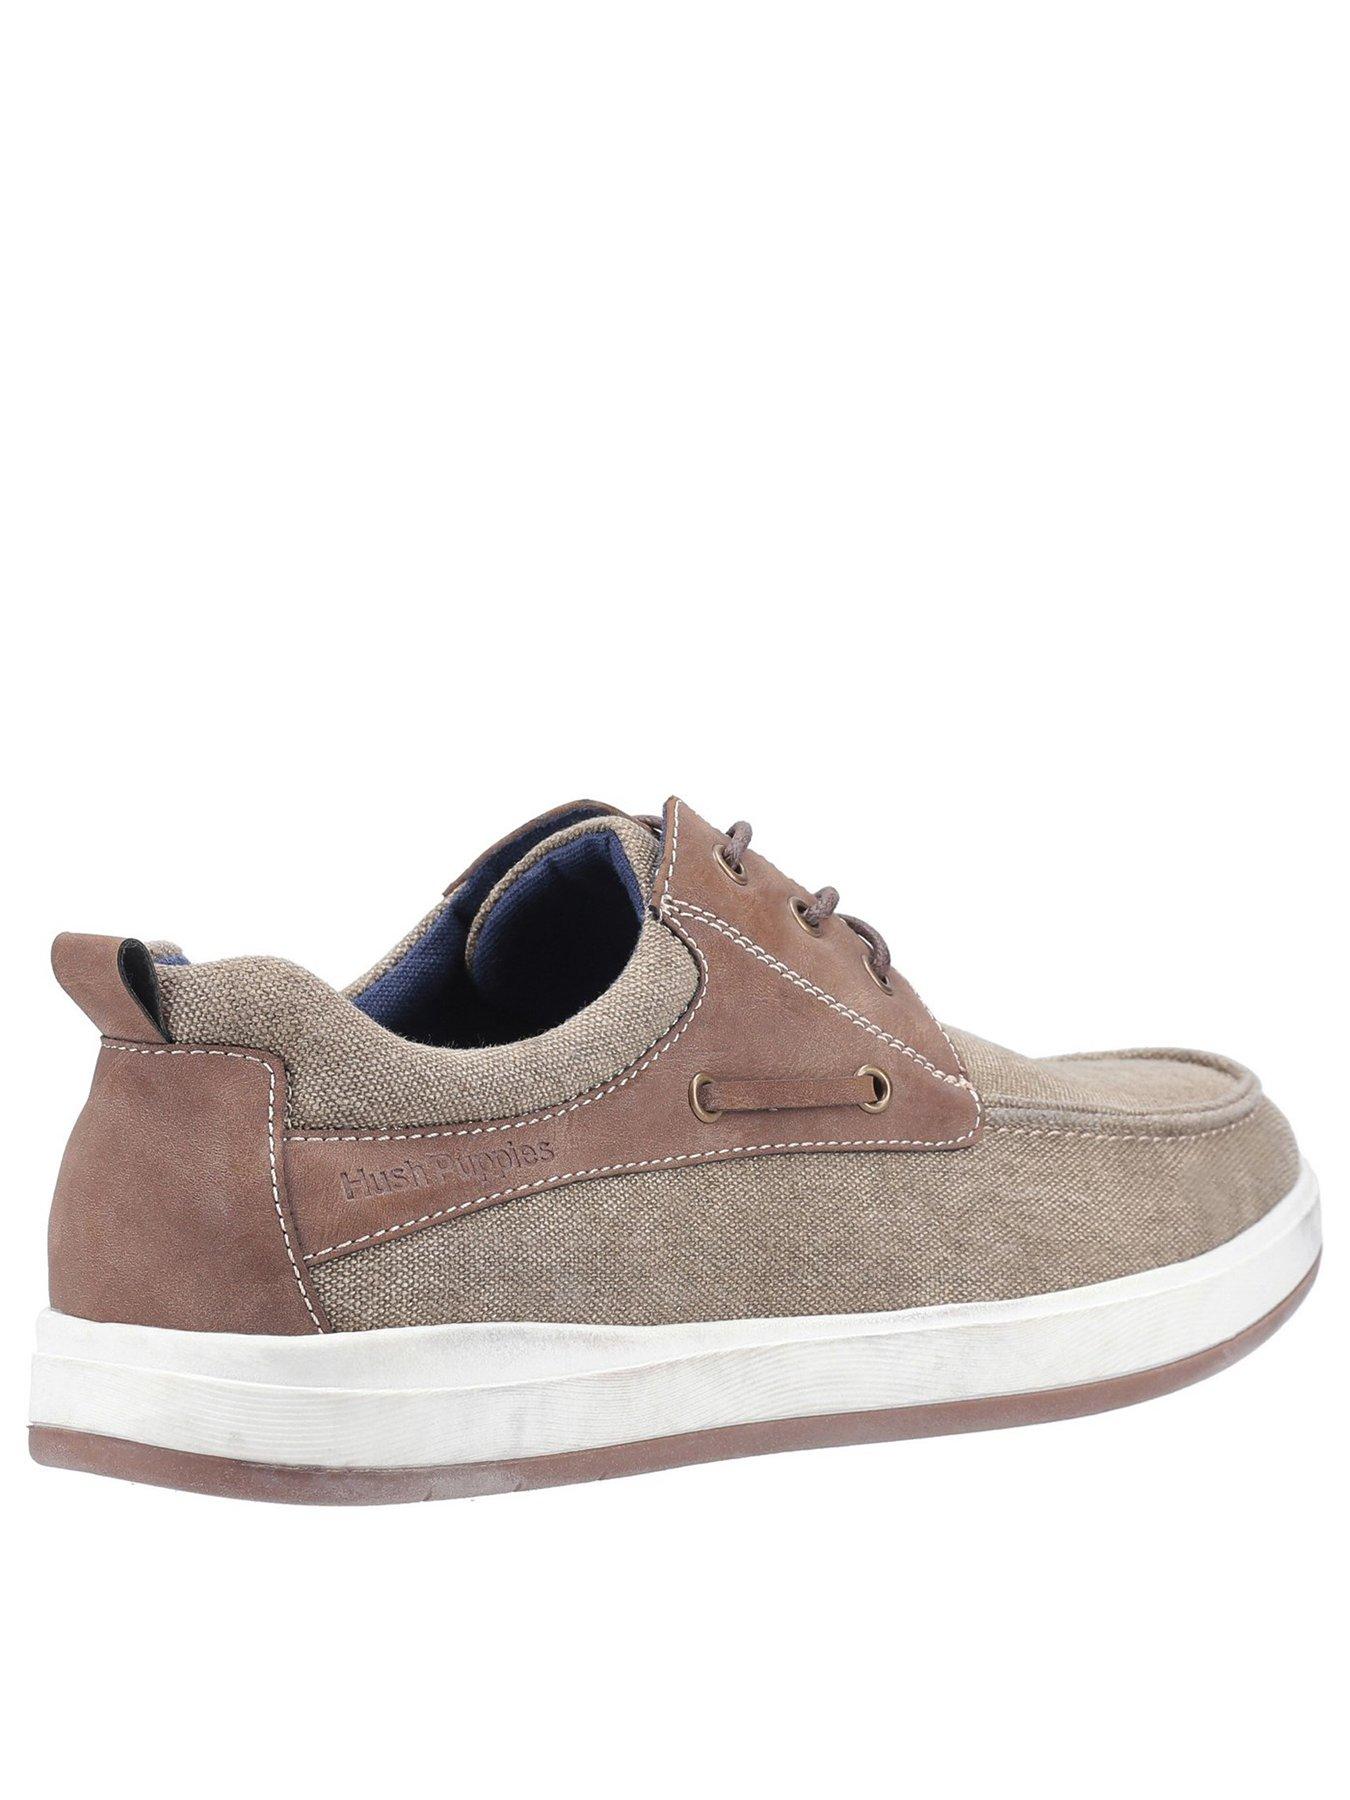 Hush Puppies Aiden Boat Shoes - Khaki | very.co.uk